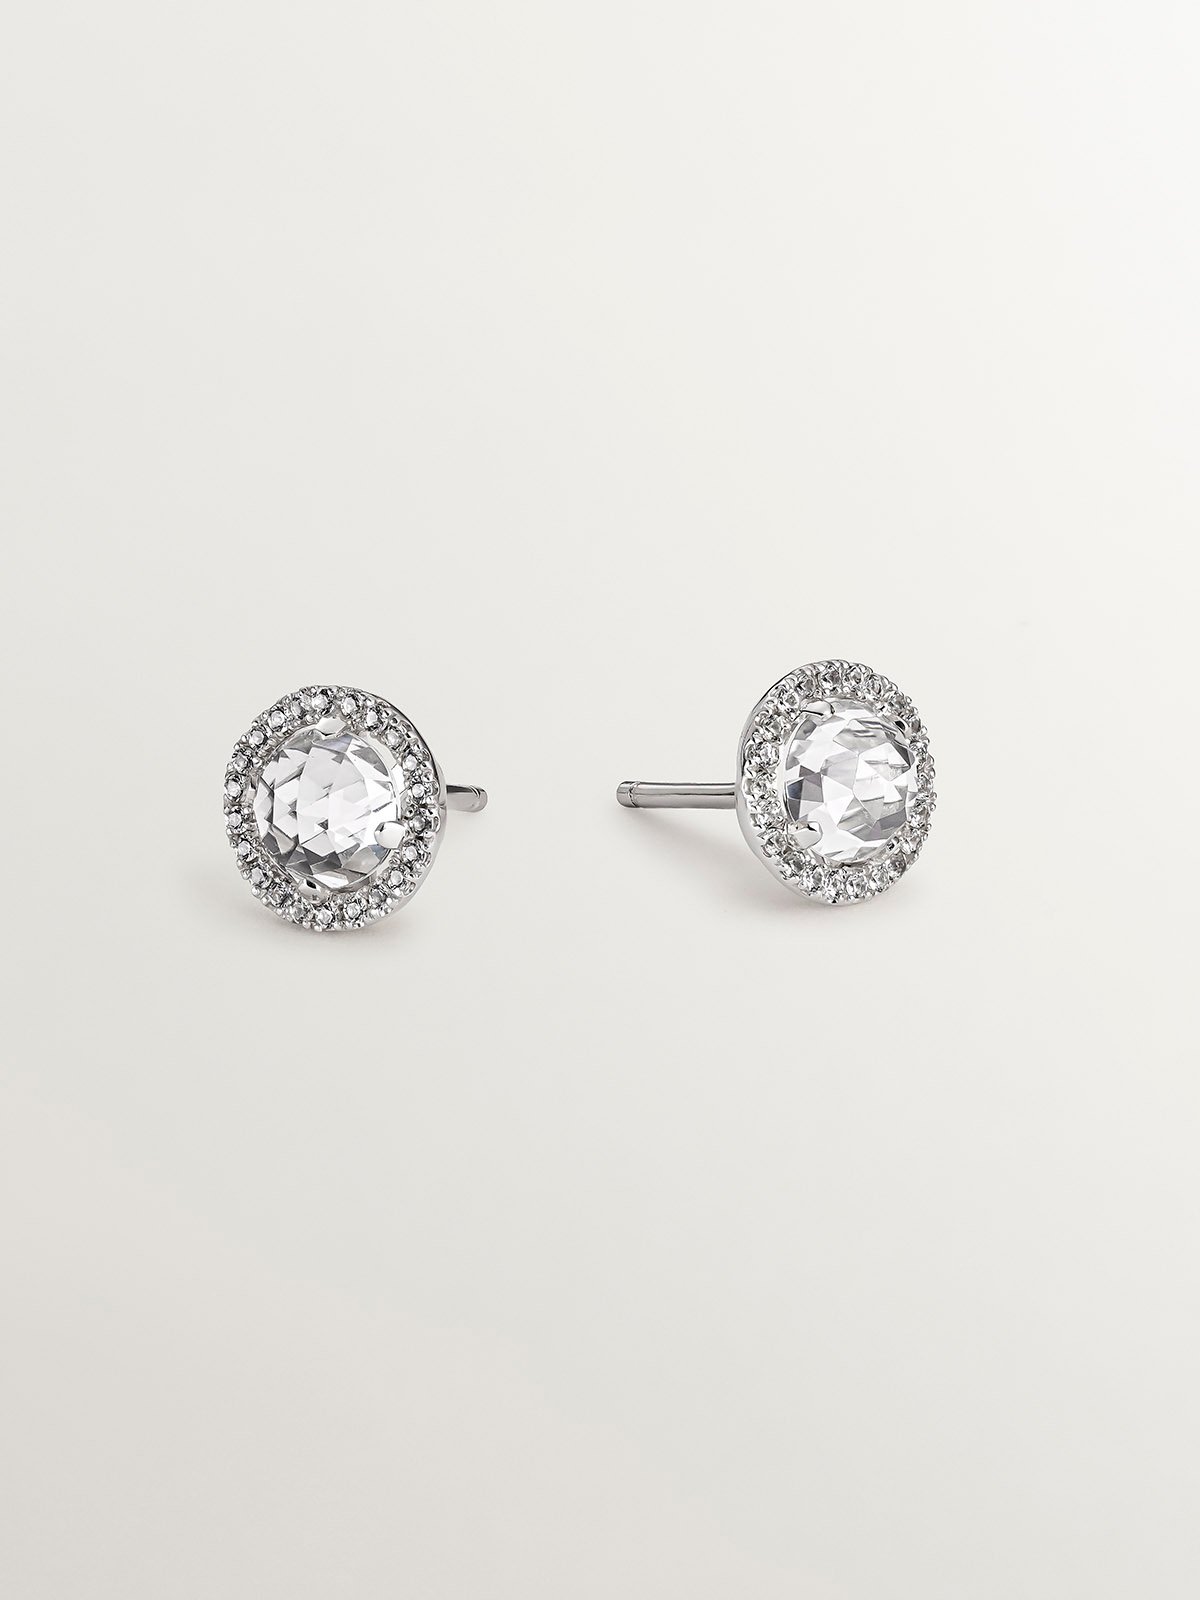 925 silver button earrings with white topaz and a halo of white sapphires.